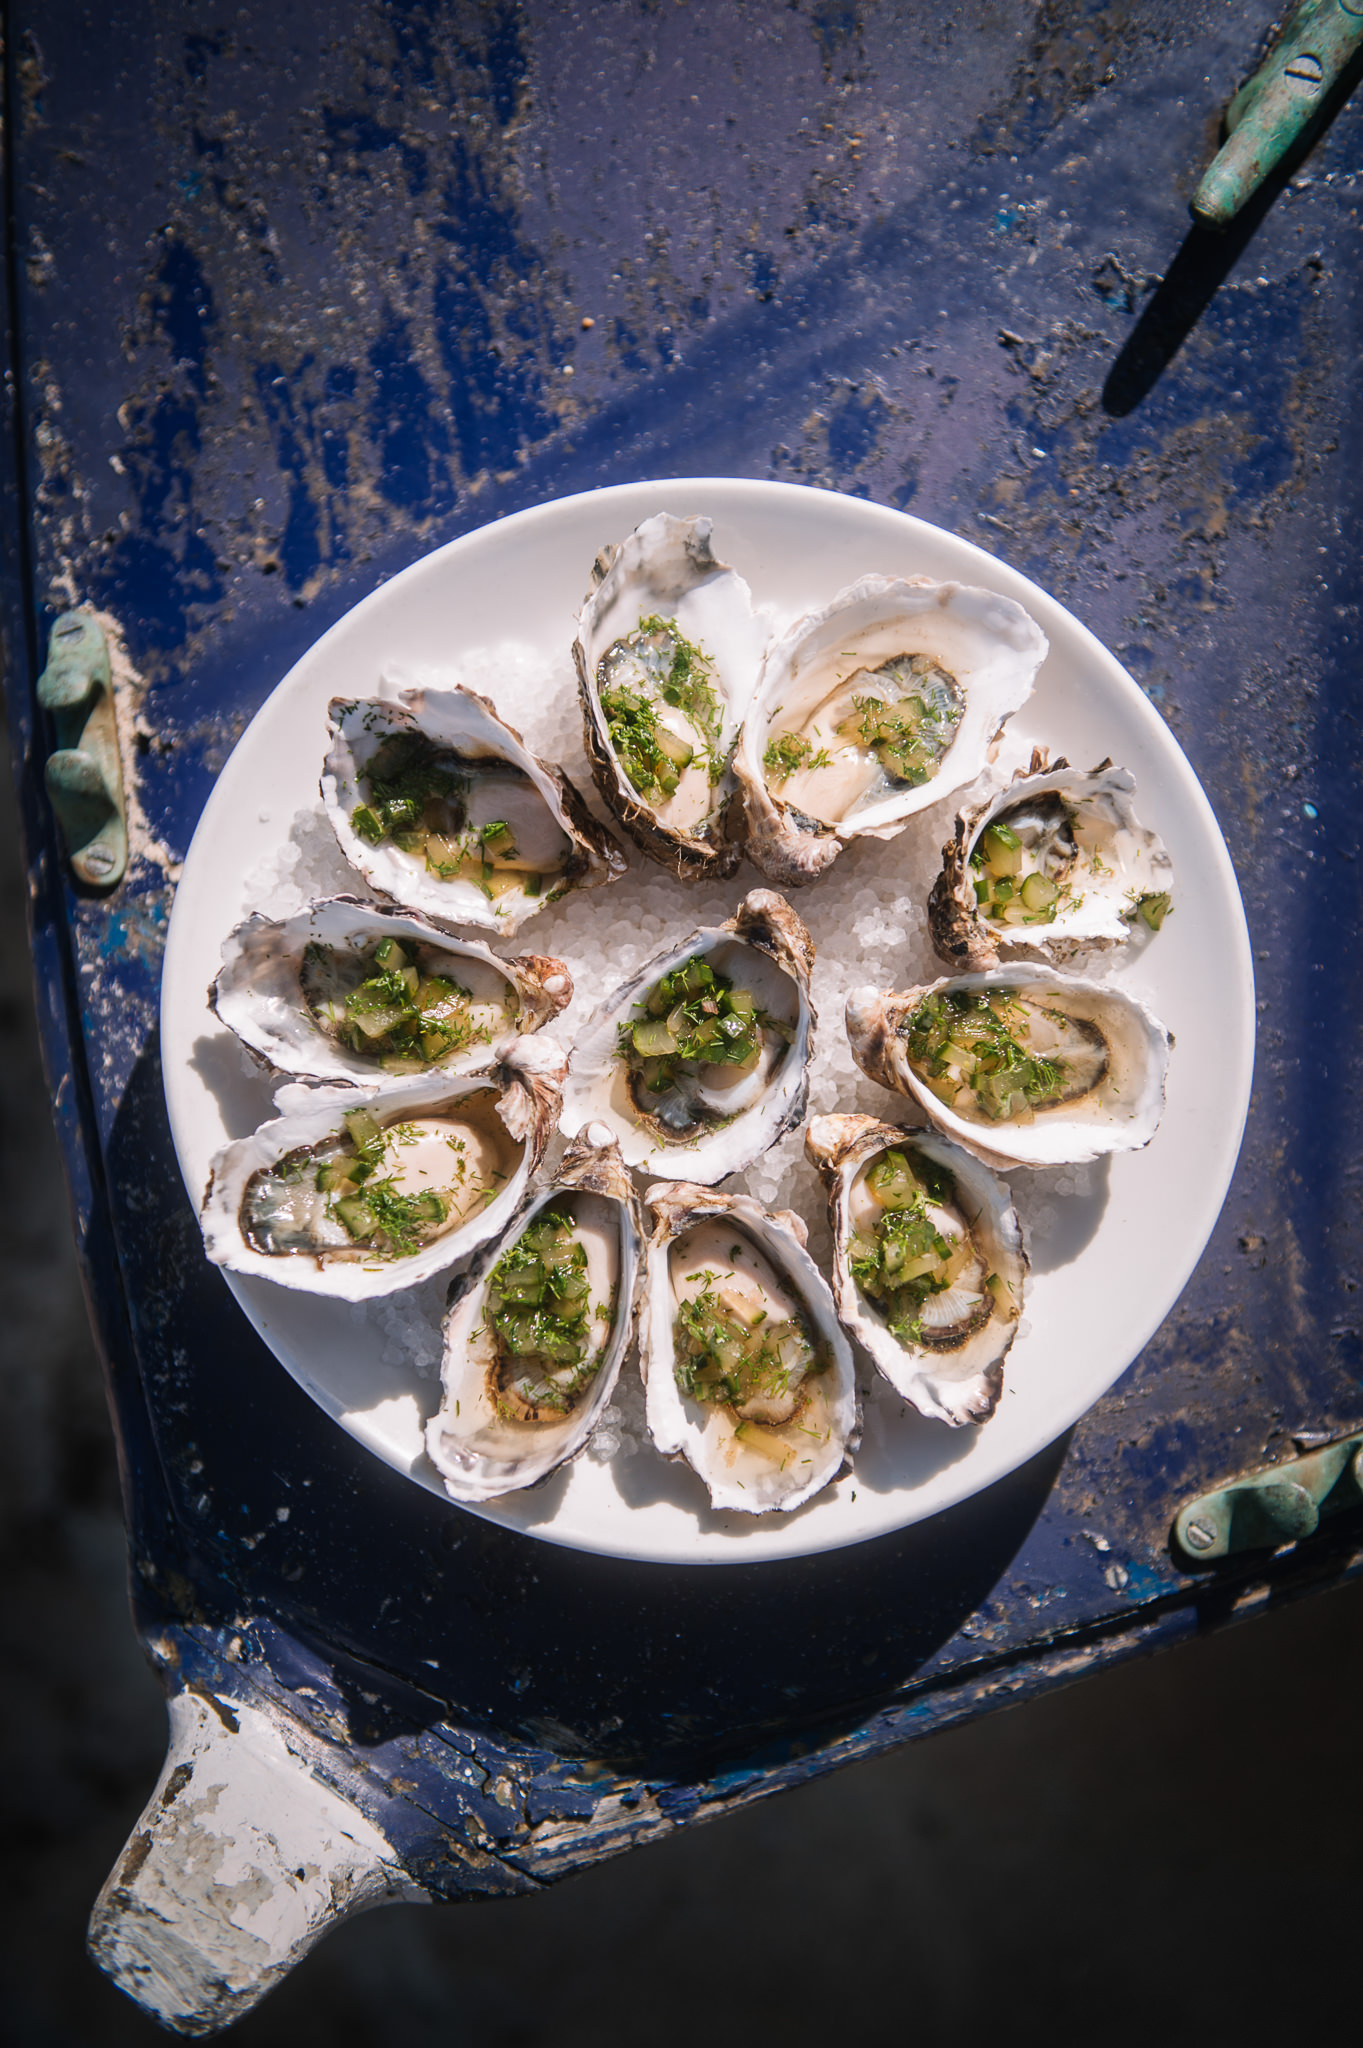  Tasmanian oysters prepared and served by Smolt kitchen 